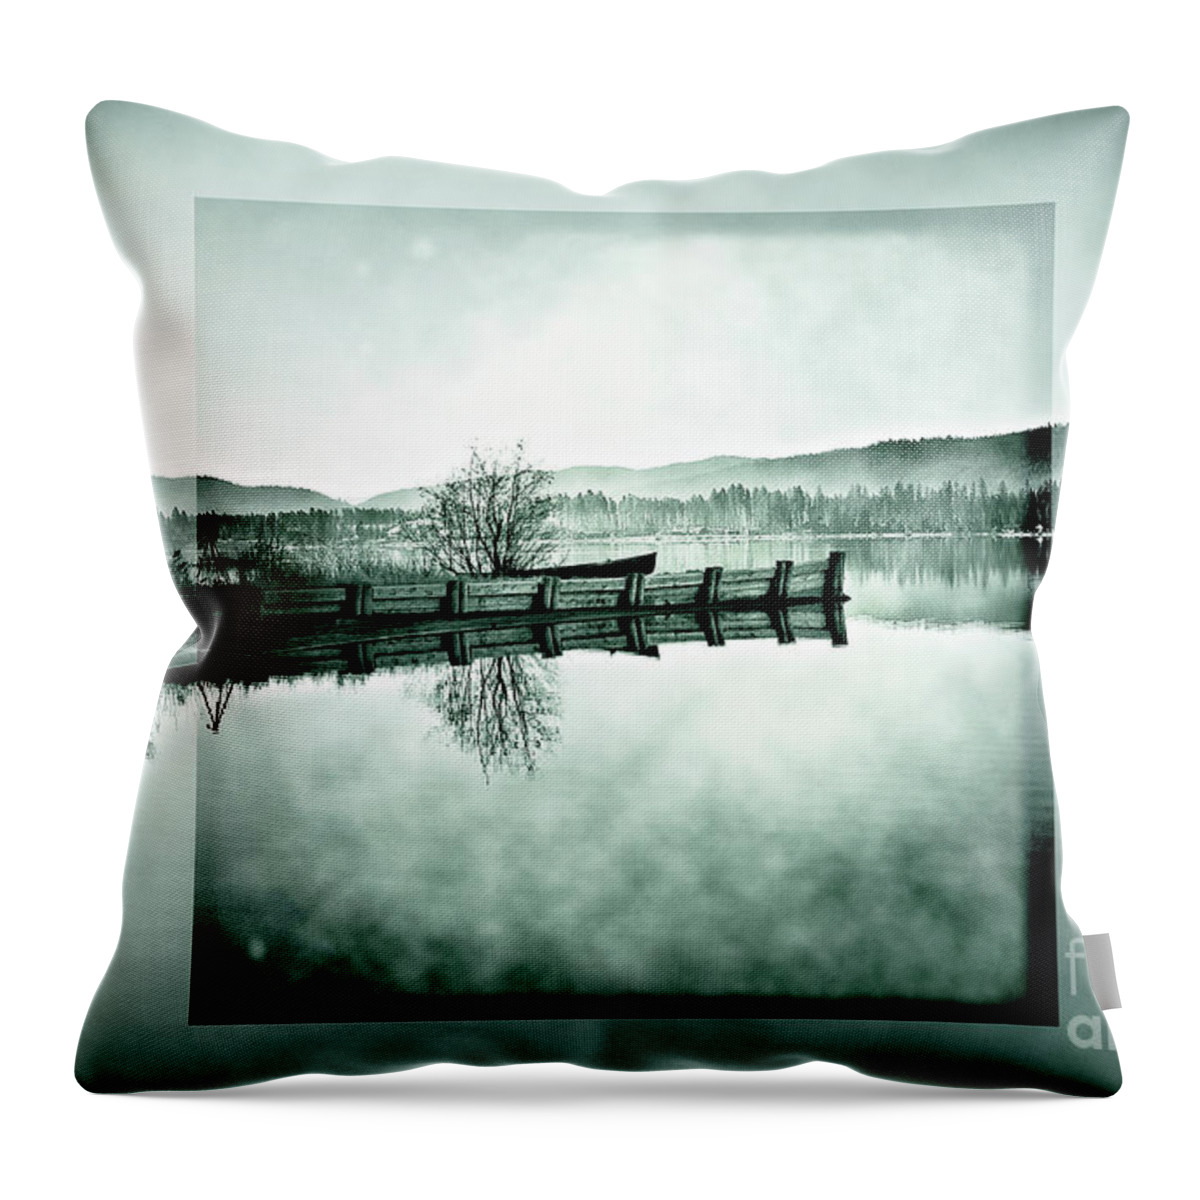 Seeley Lake Throw Pillow featuring the photograph Cool Morning On Seeley Lake by Janie Johnson